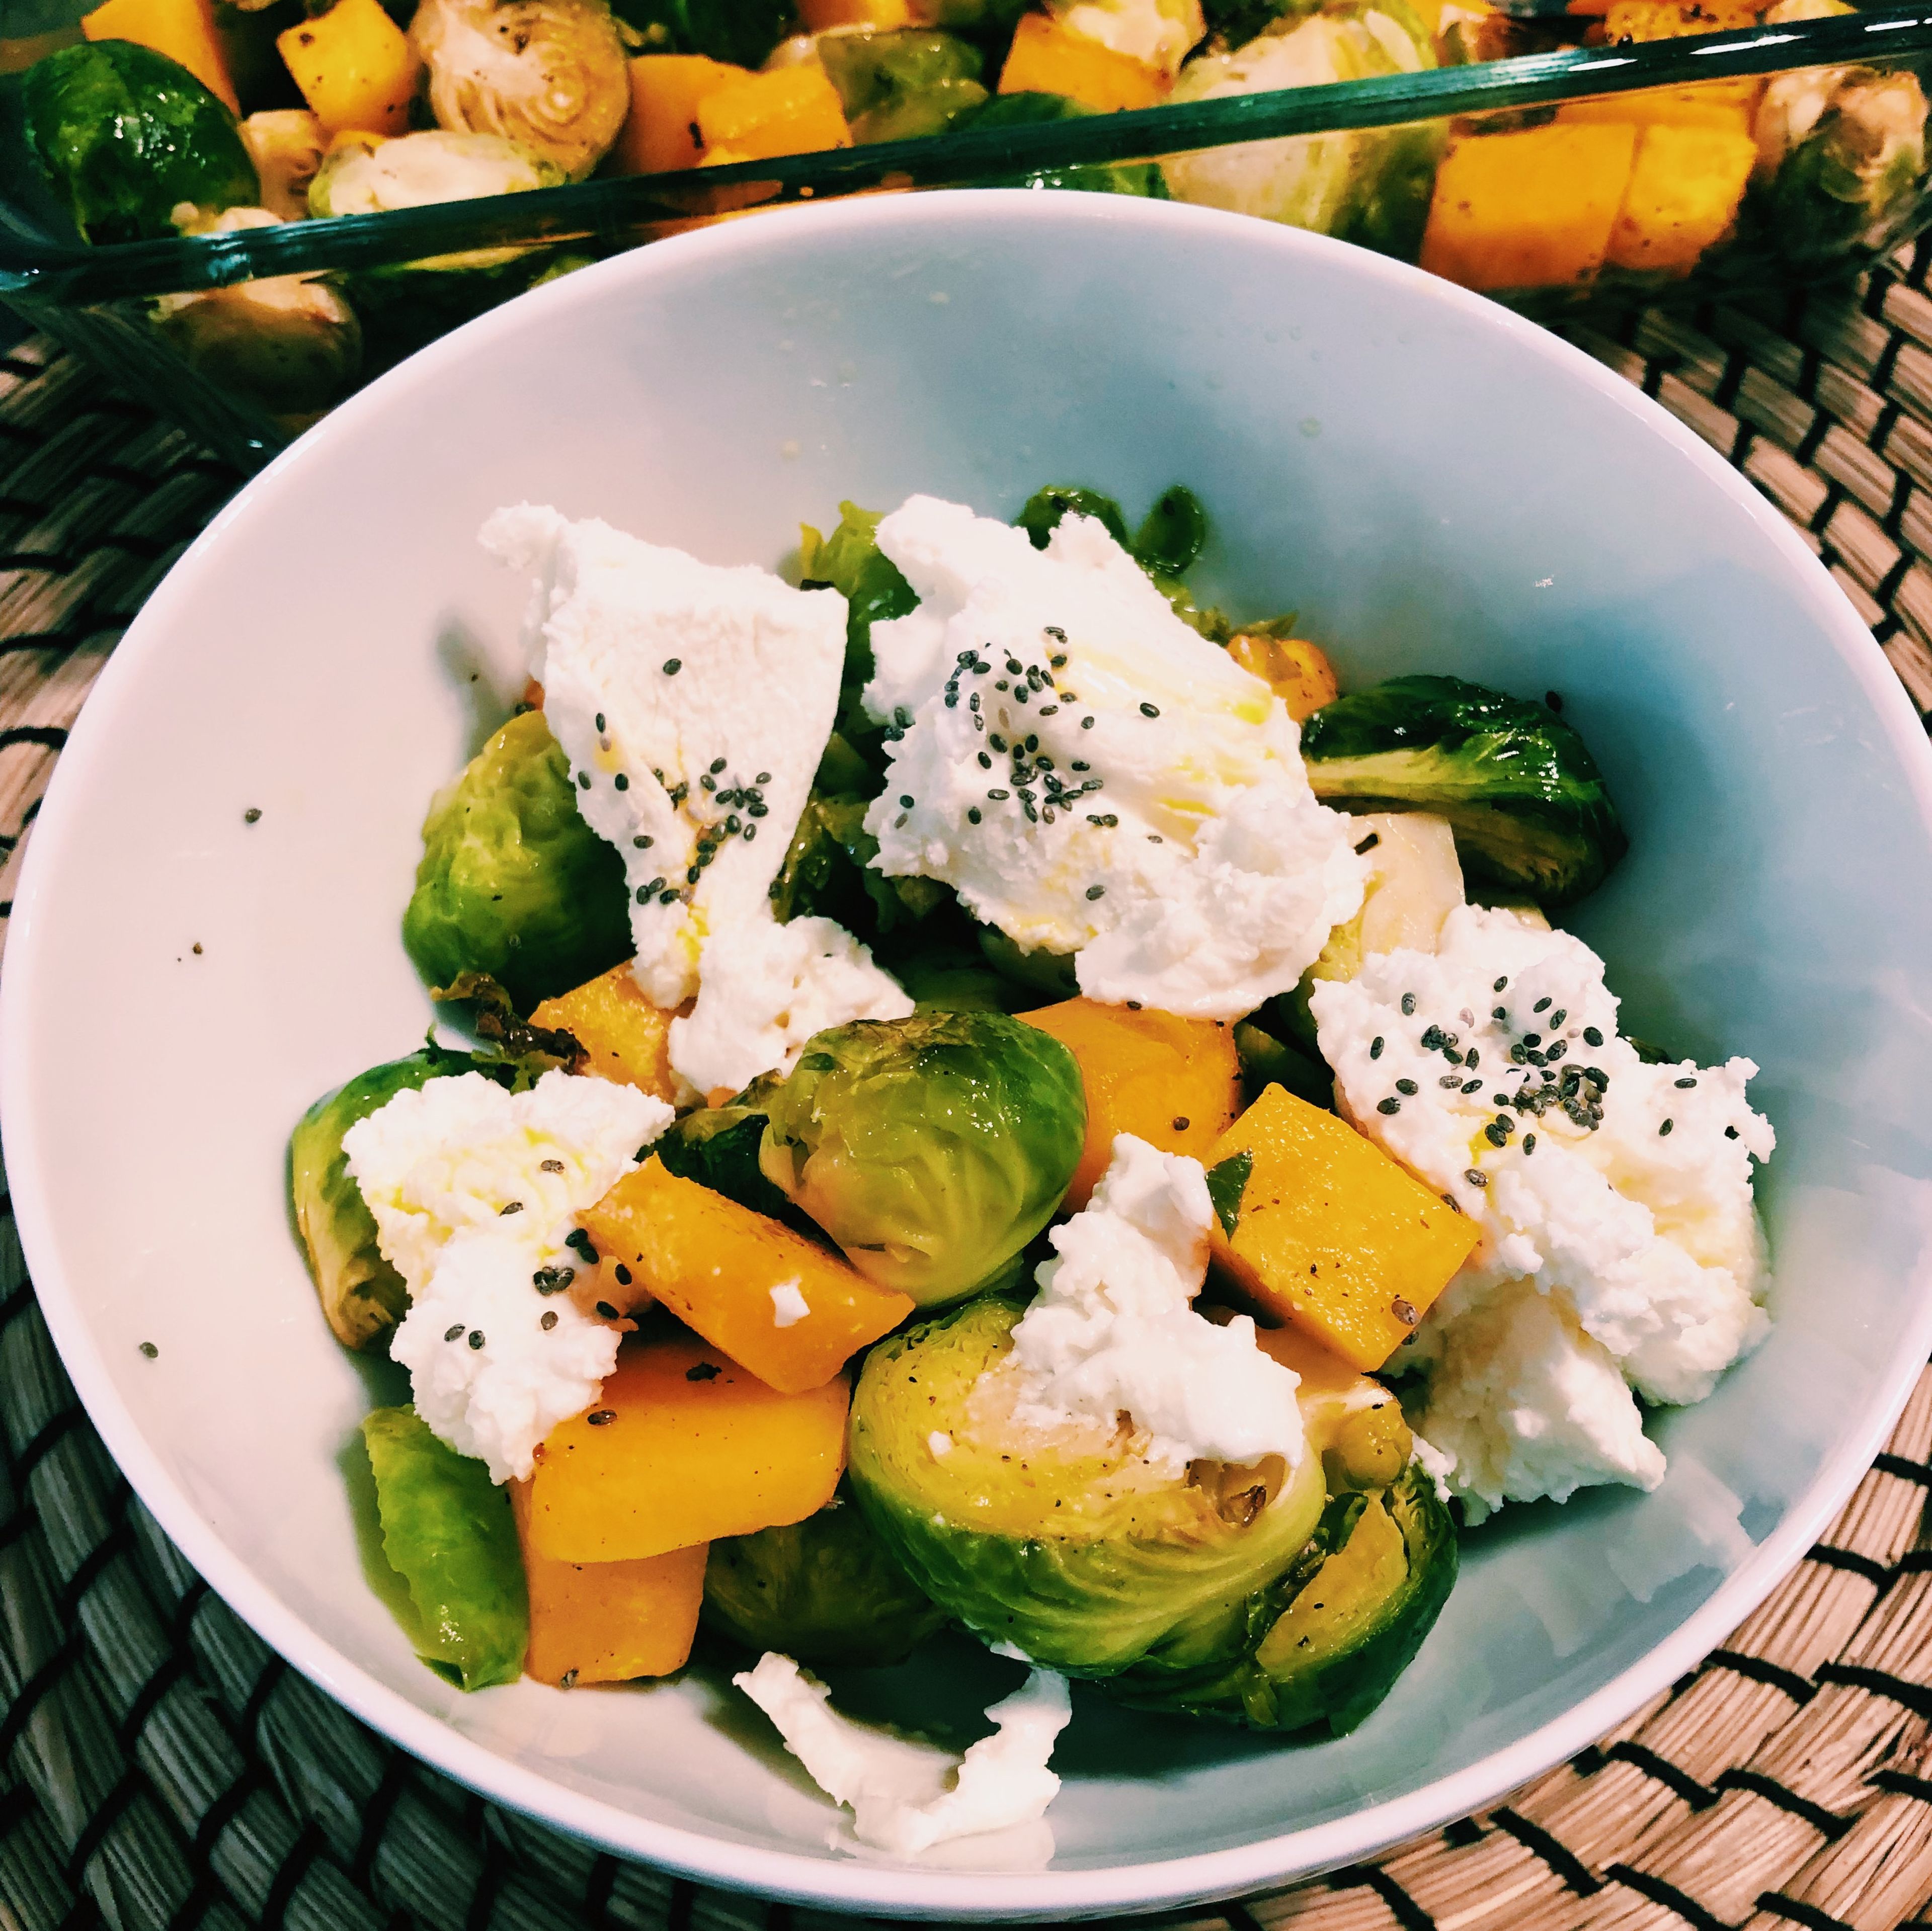 Serve dish in a bowl and add a few spoons of soft goat cheese. Garnish with chia seeds and a bit of maple syrup.